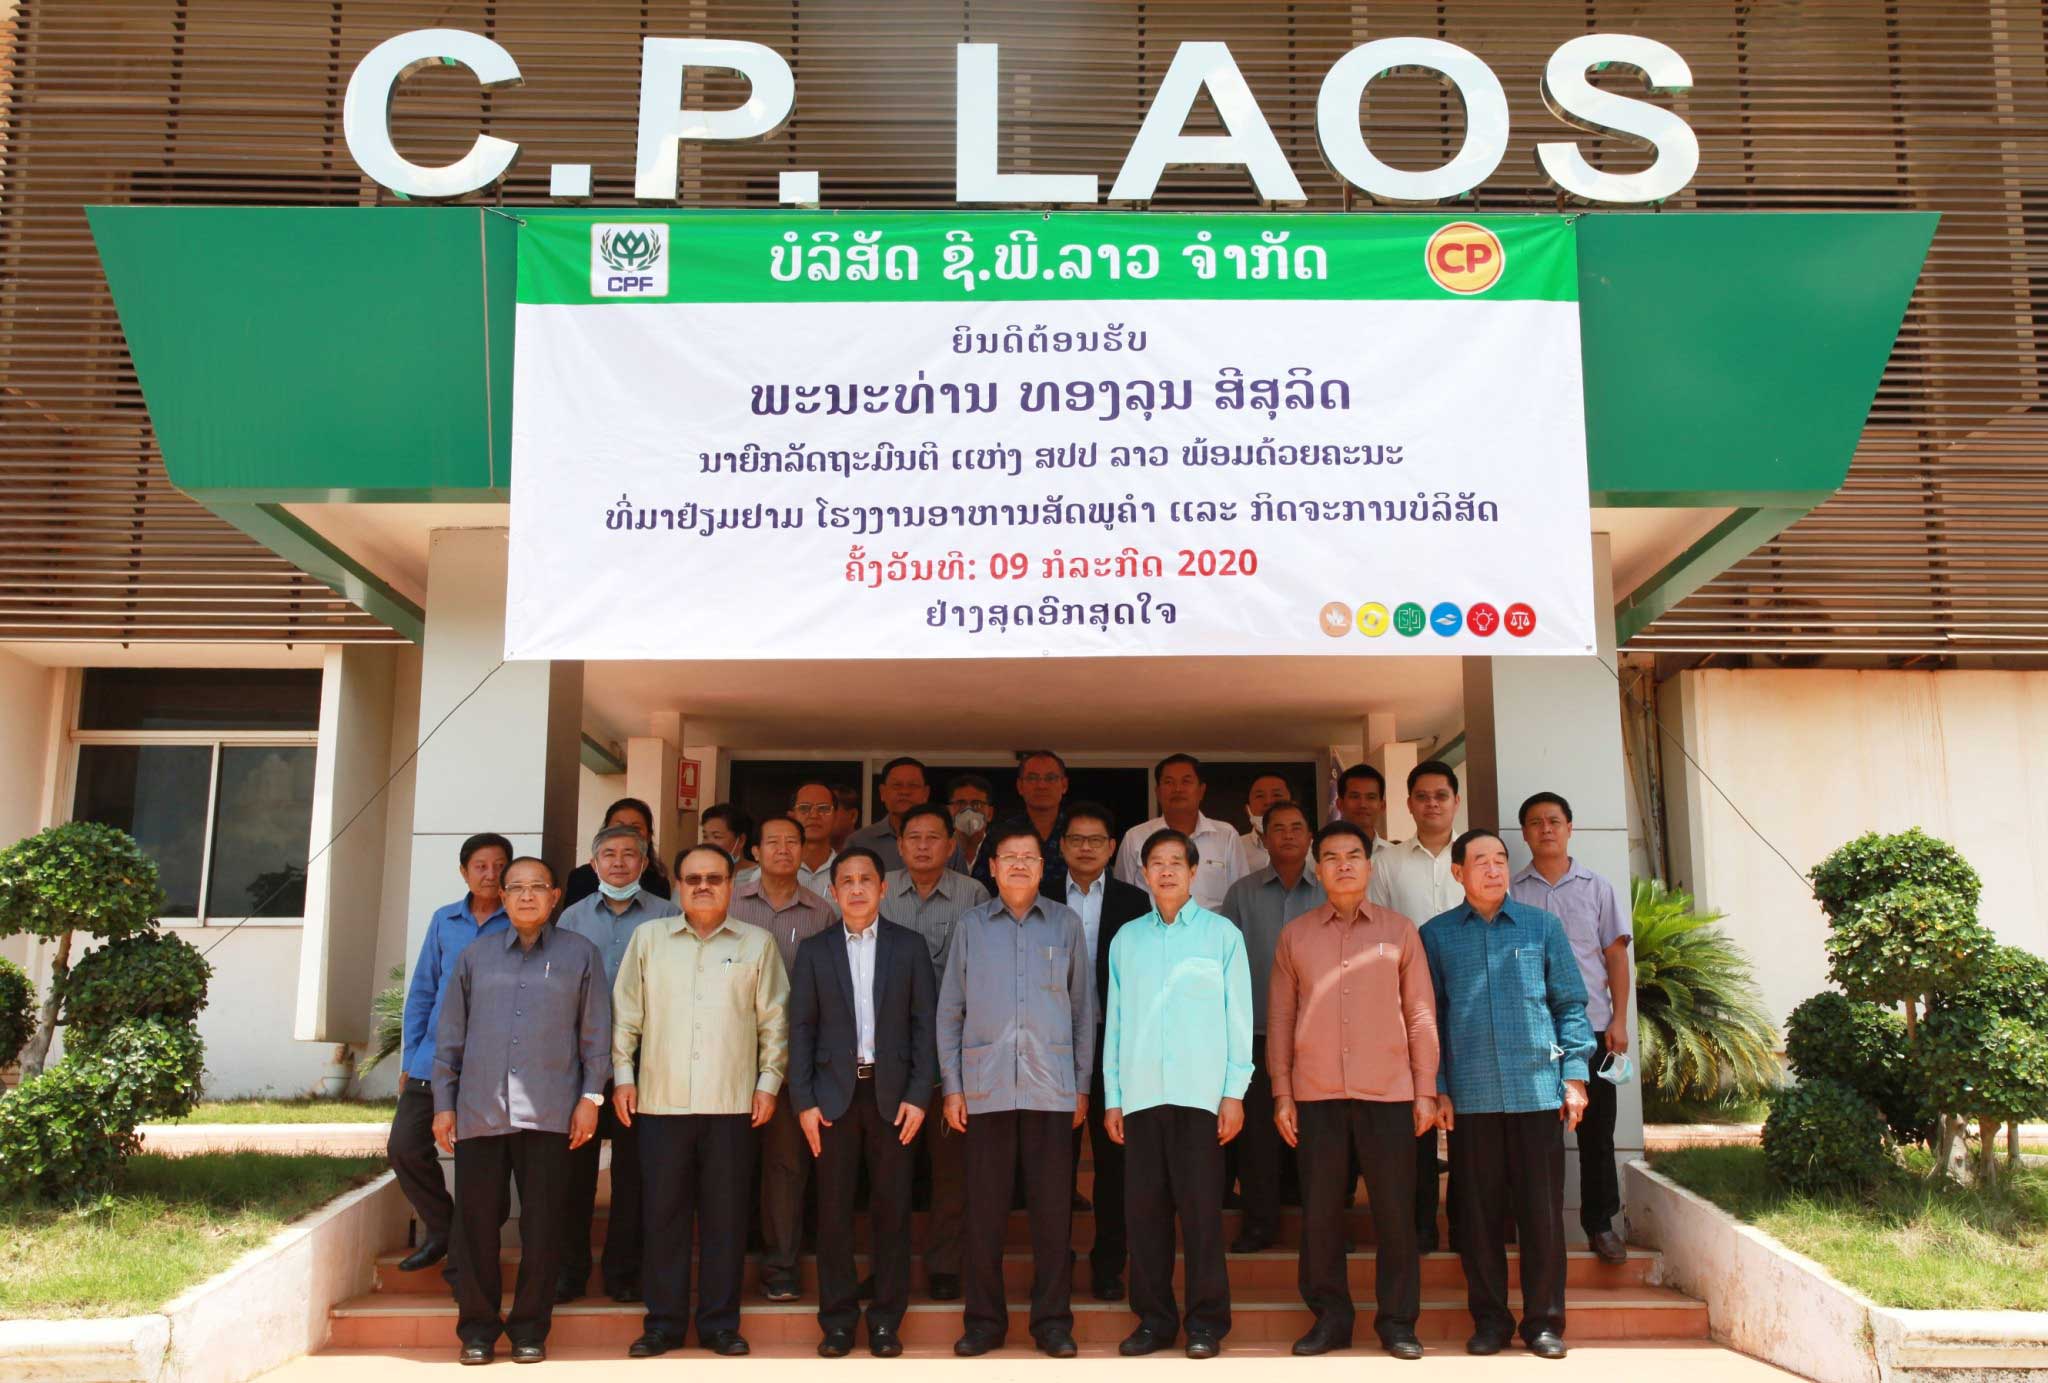 Lao PM lauds CP Laos creating jobs for Lao people